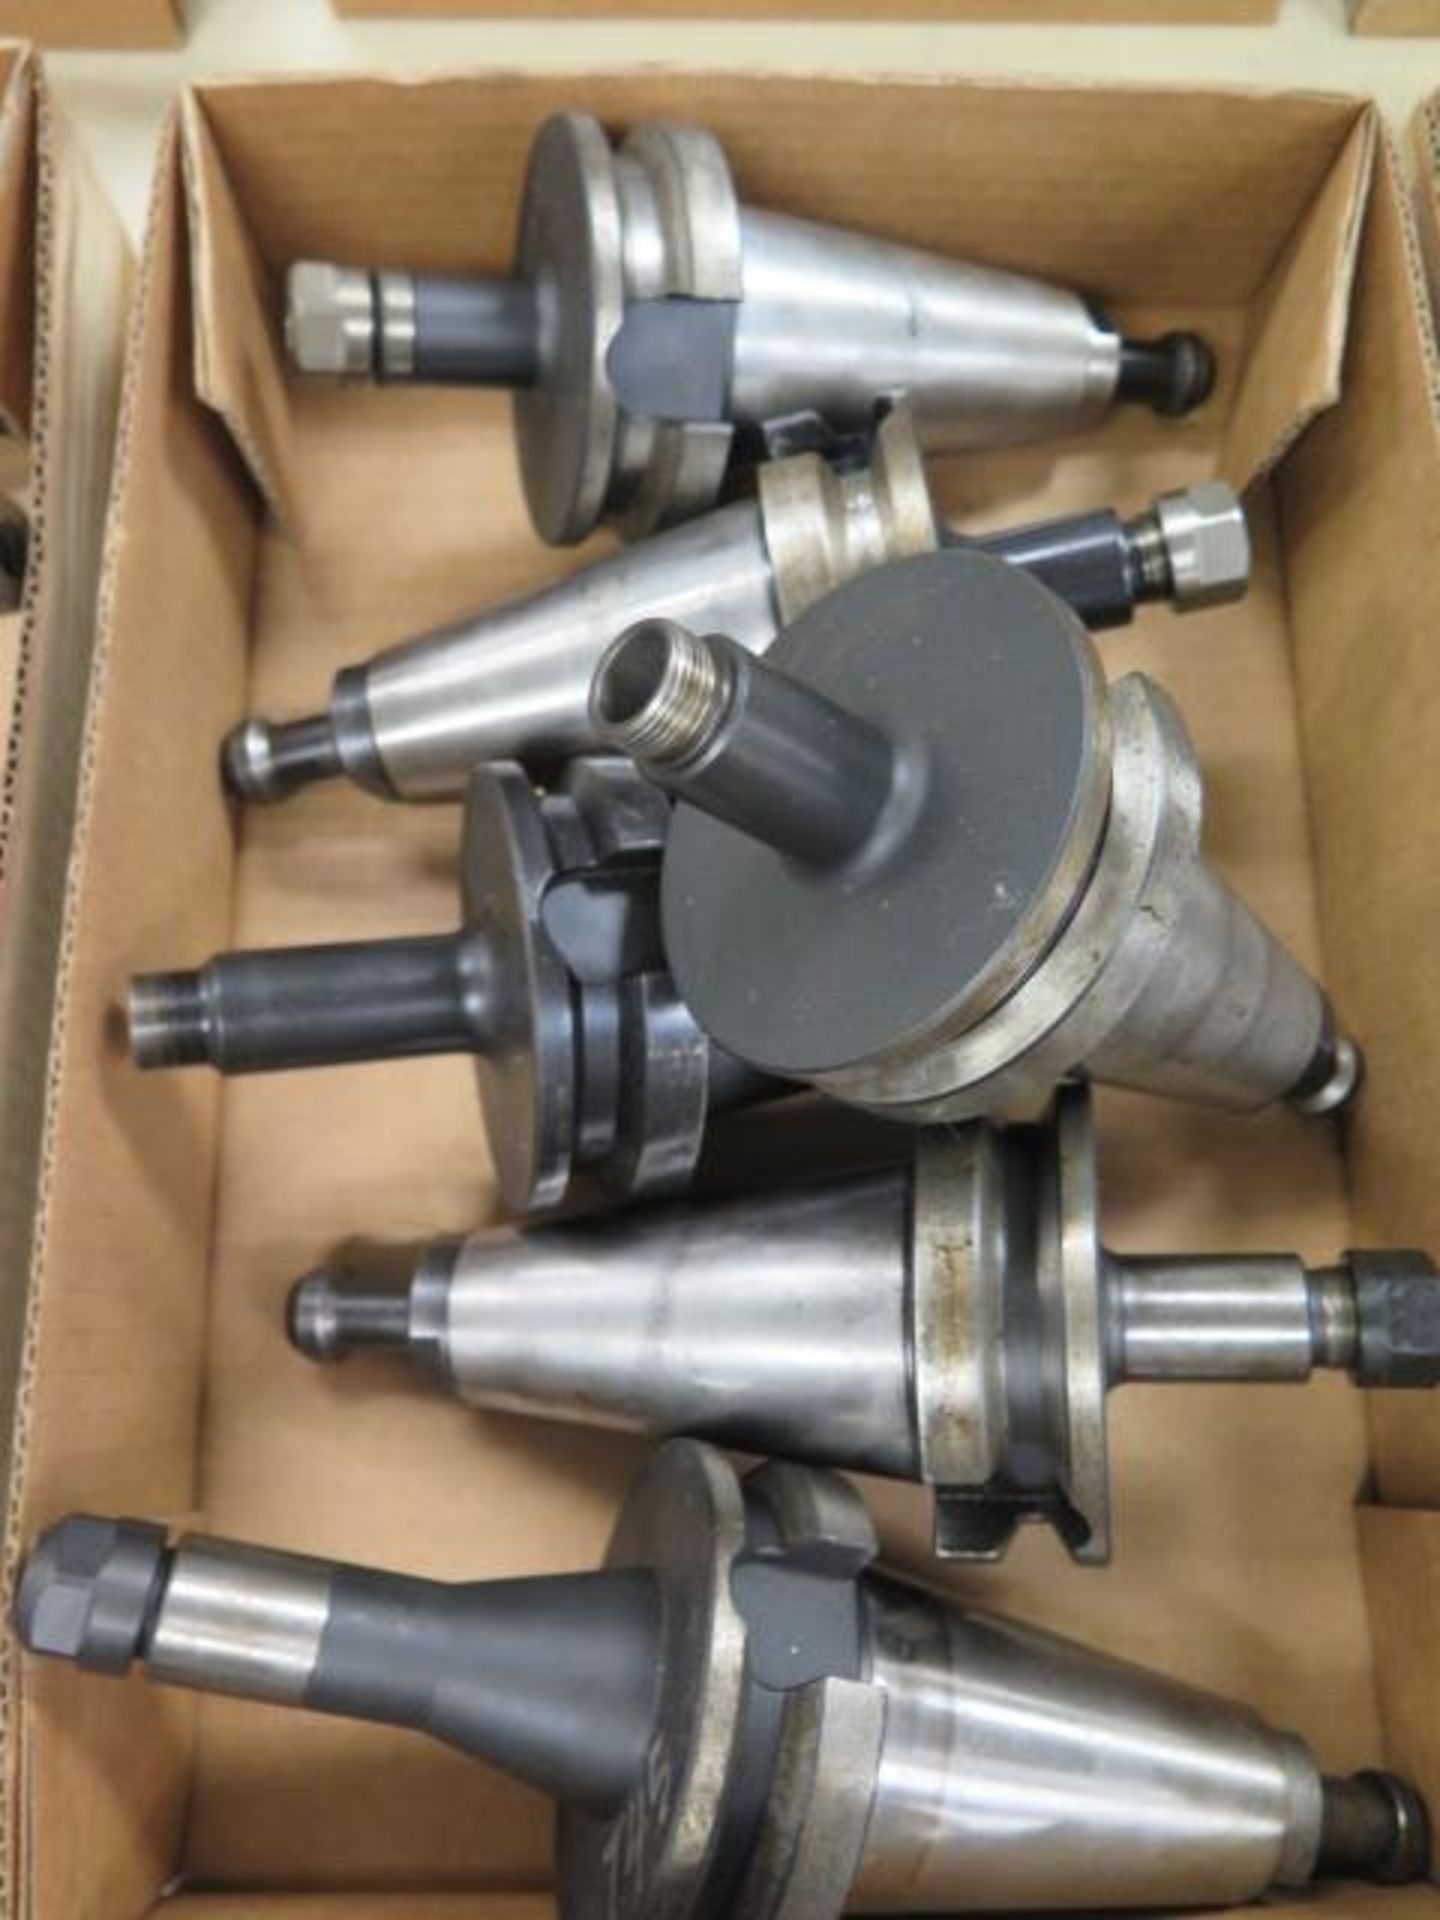 BT-50 Taper ER16 Collet chucks (6) (SOLD AS-IS - NO WARRANTY) (Located @ 2229 Ringwood Ave. San Jose - Image 2 of 6